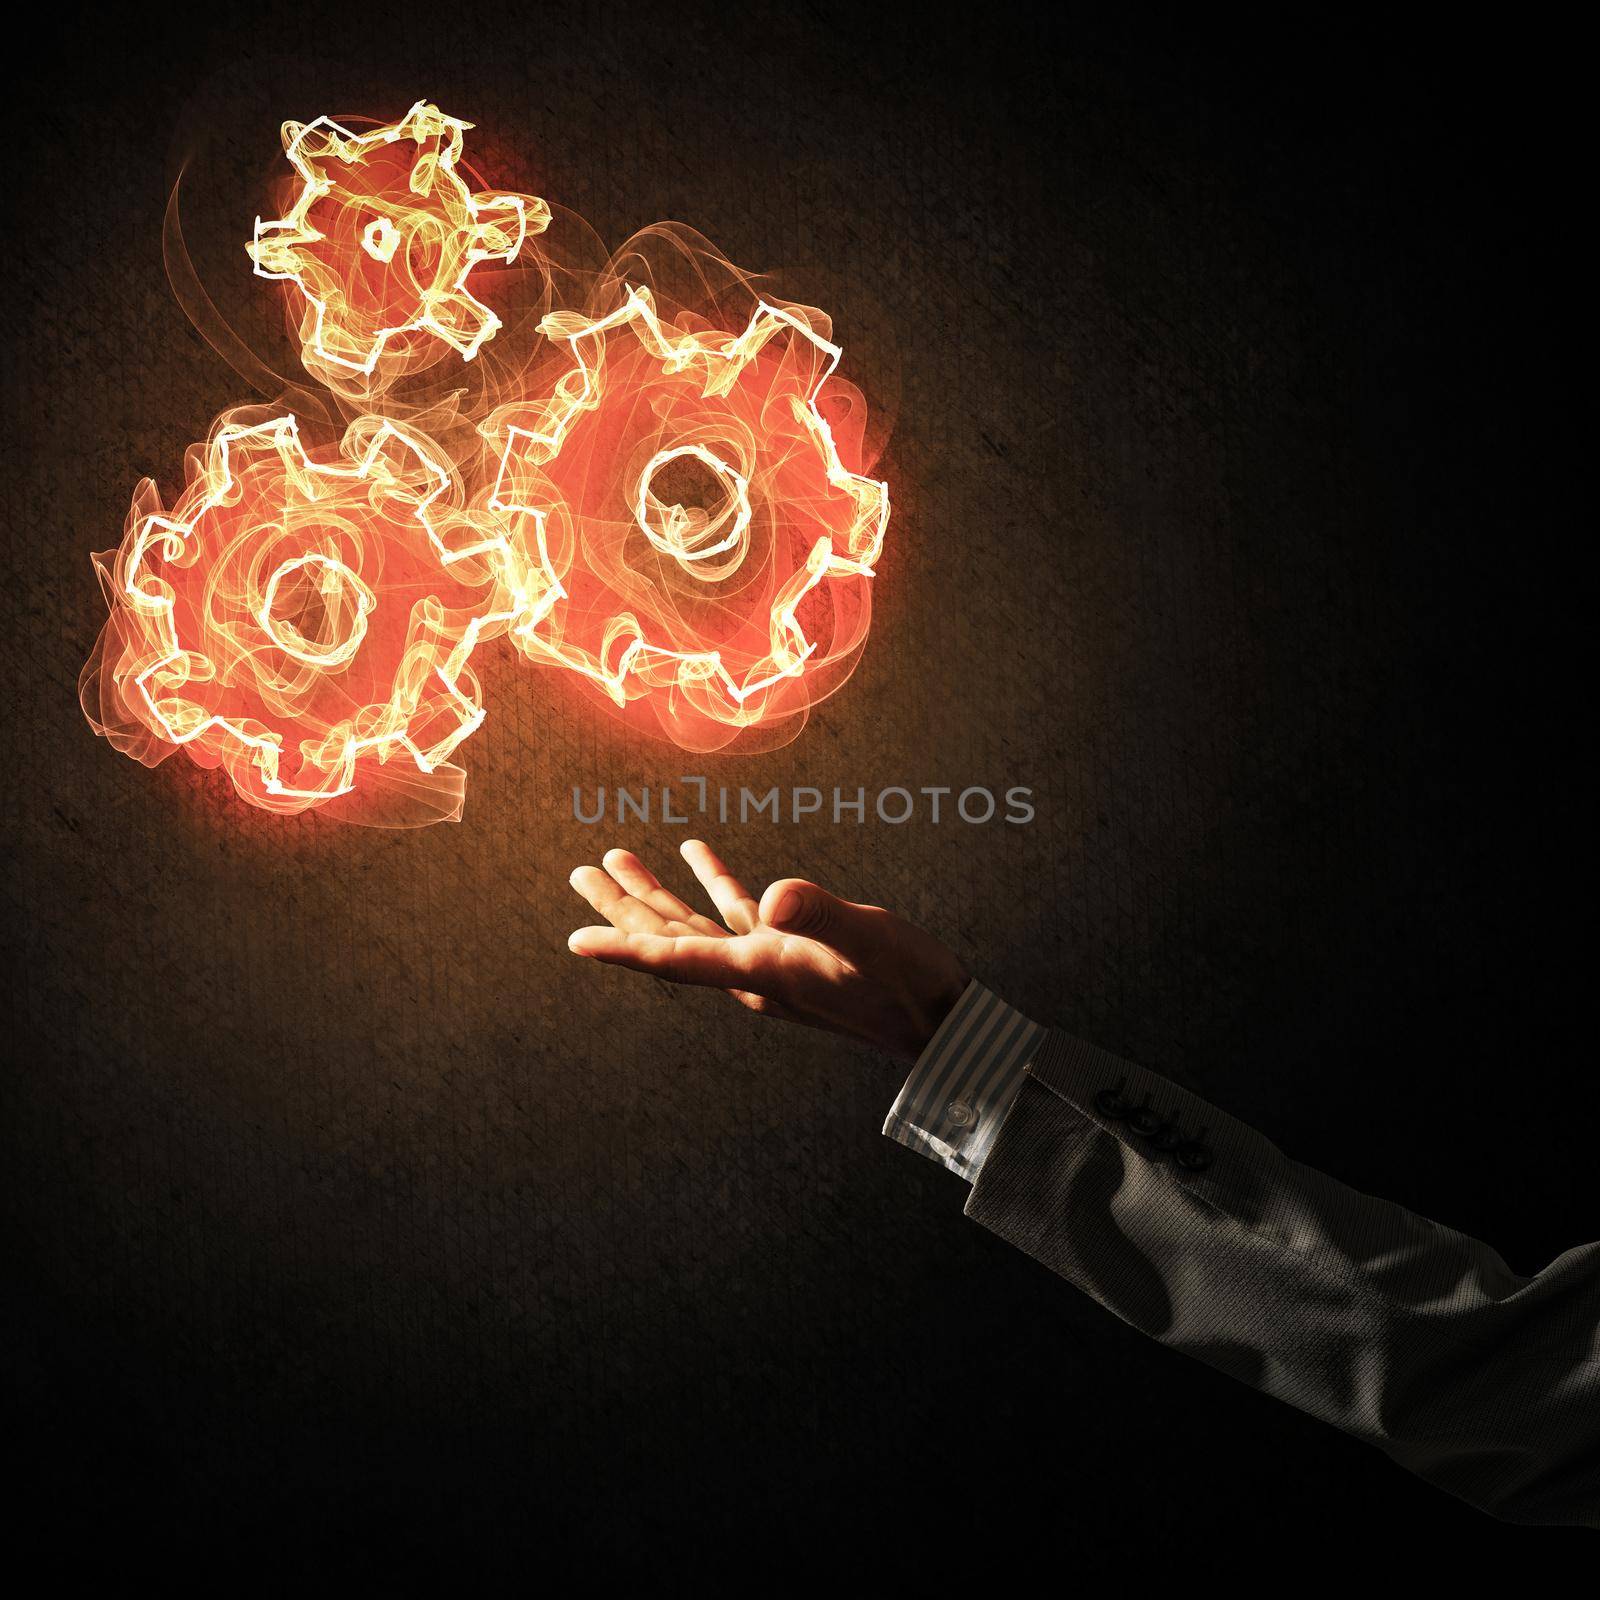 Concept of teamworking or organization presented by fire glowing cogwheels by adam121